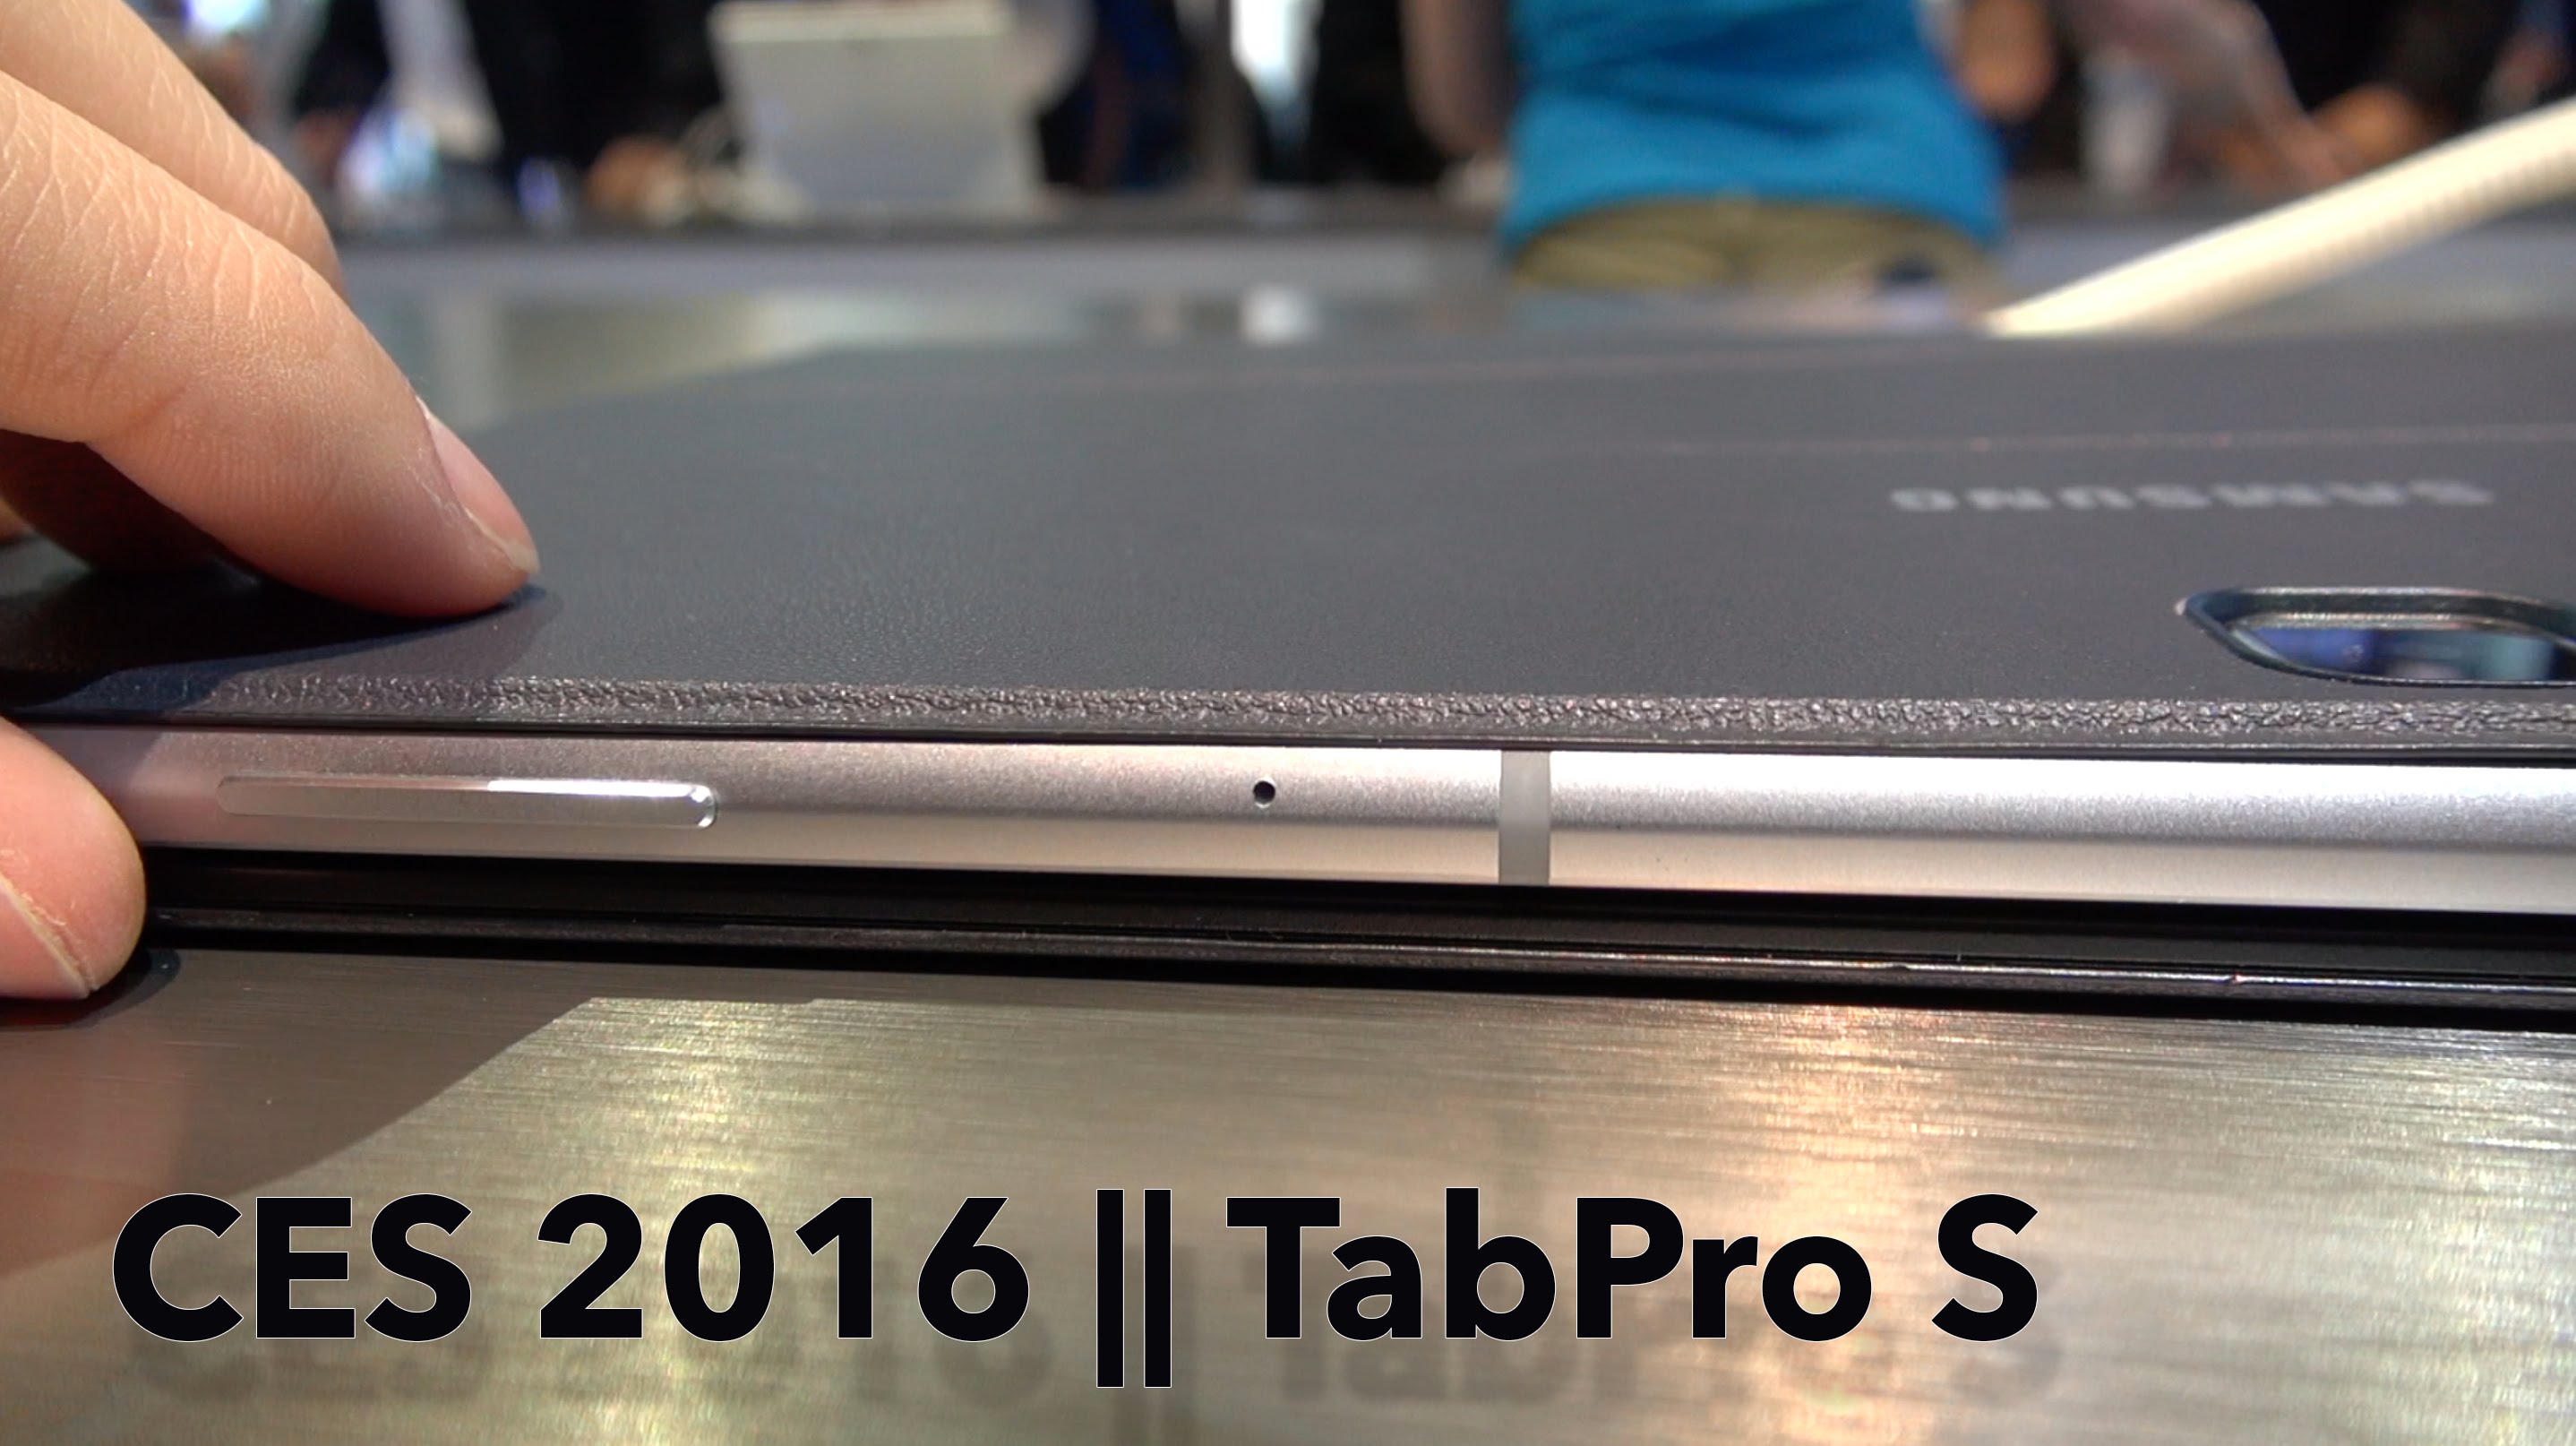 Galaxy TabPro S: A Success or Knock Off? || CES 2016